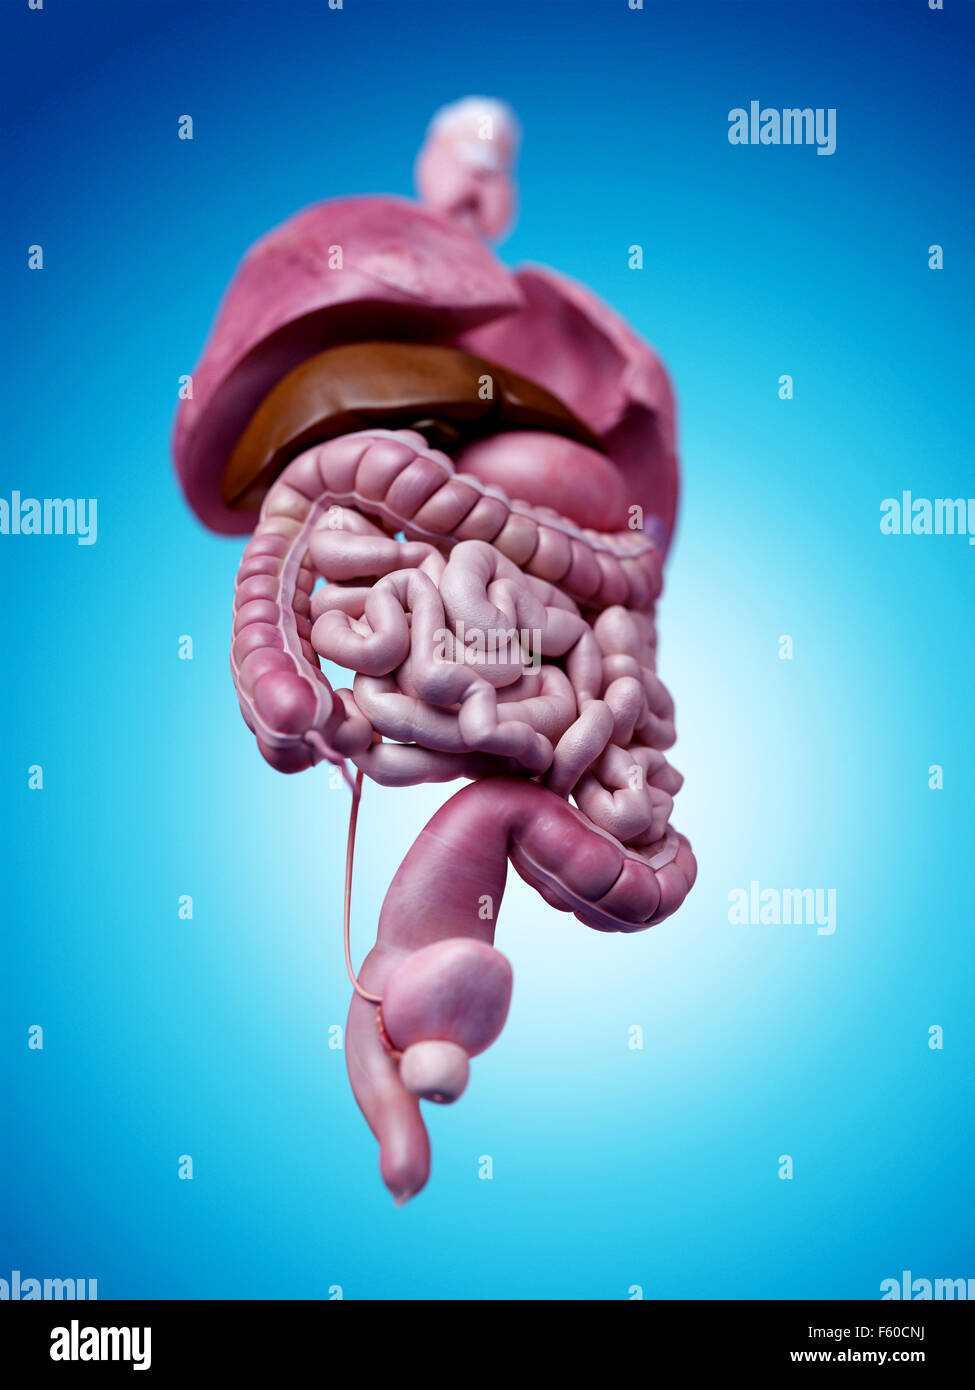 medically accurate illustration of the human organs Stock Photo